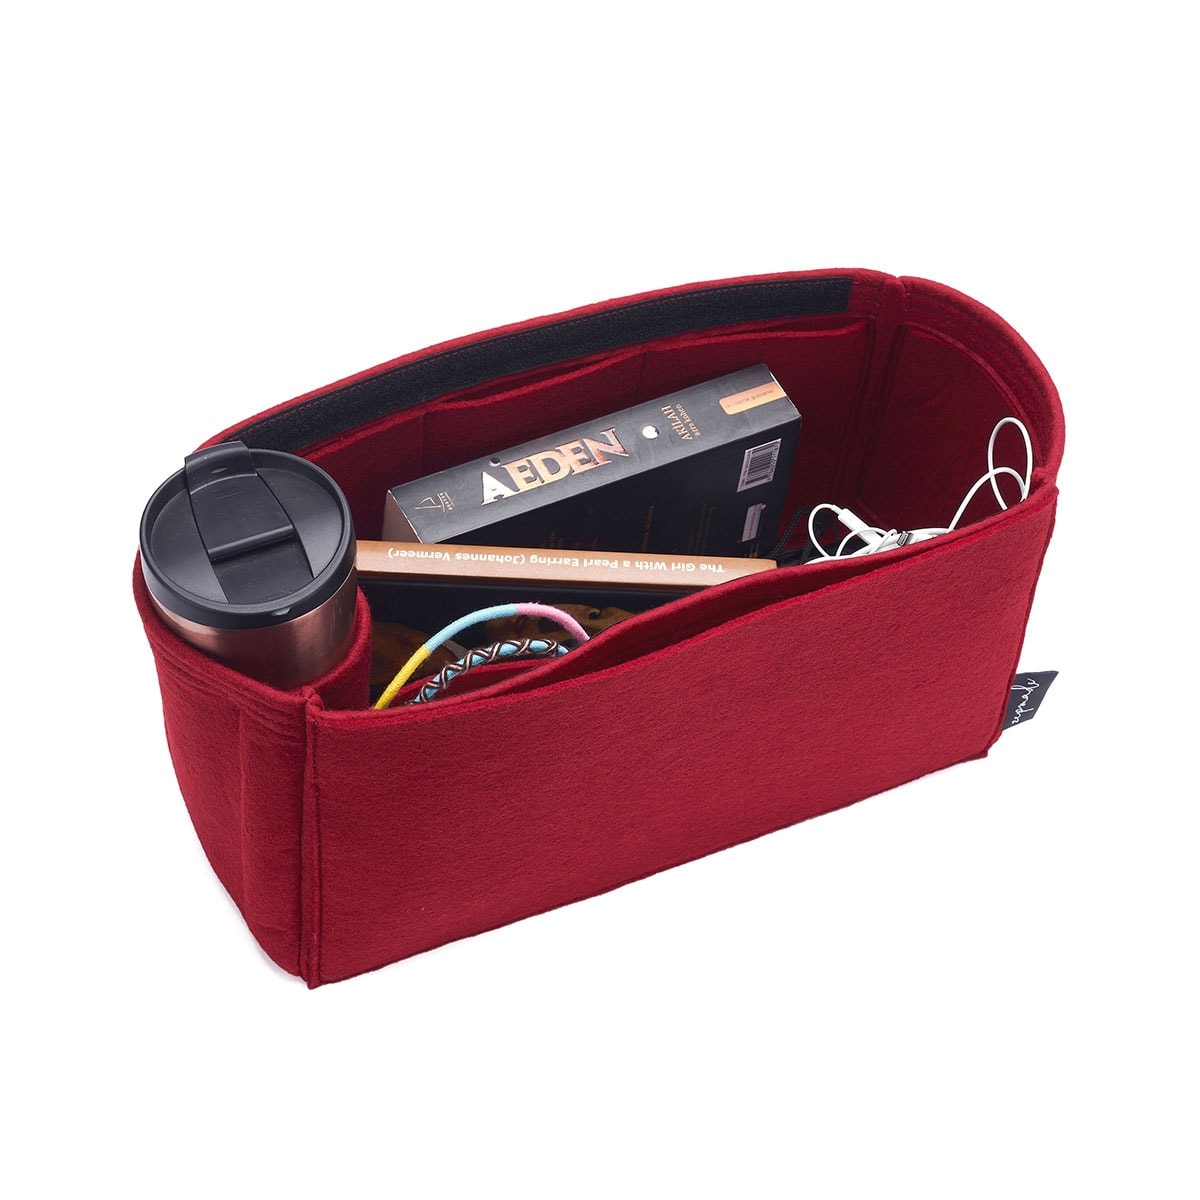 Bag and Purse Organizer with Zipper Top Style for OntheGo